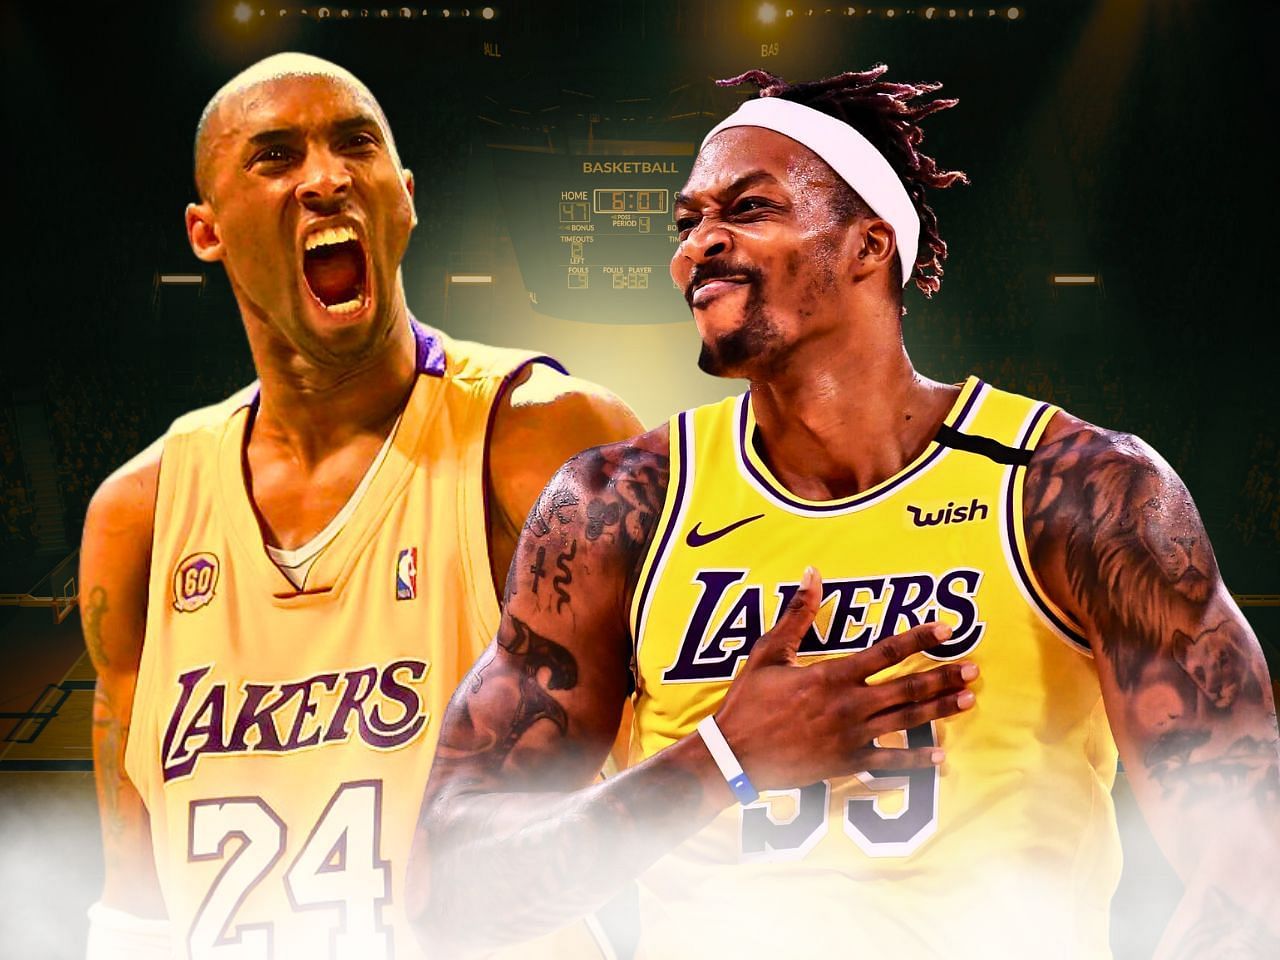 Kobe Bryant wanted nothing to do with Dwight Howard when he joined the Lakers.